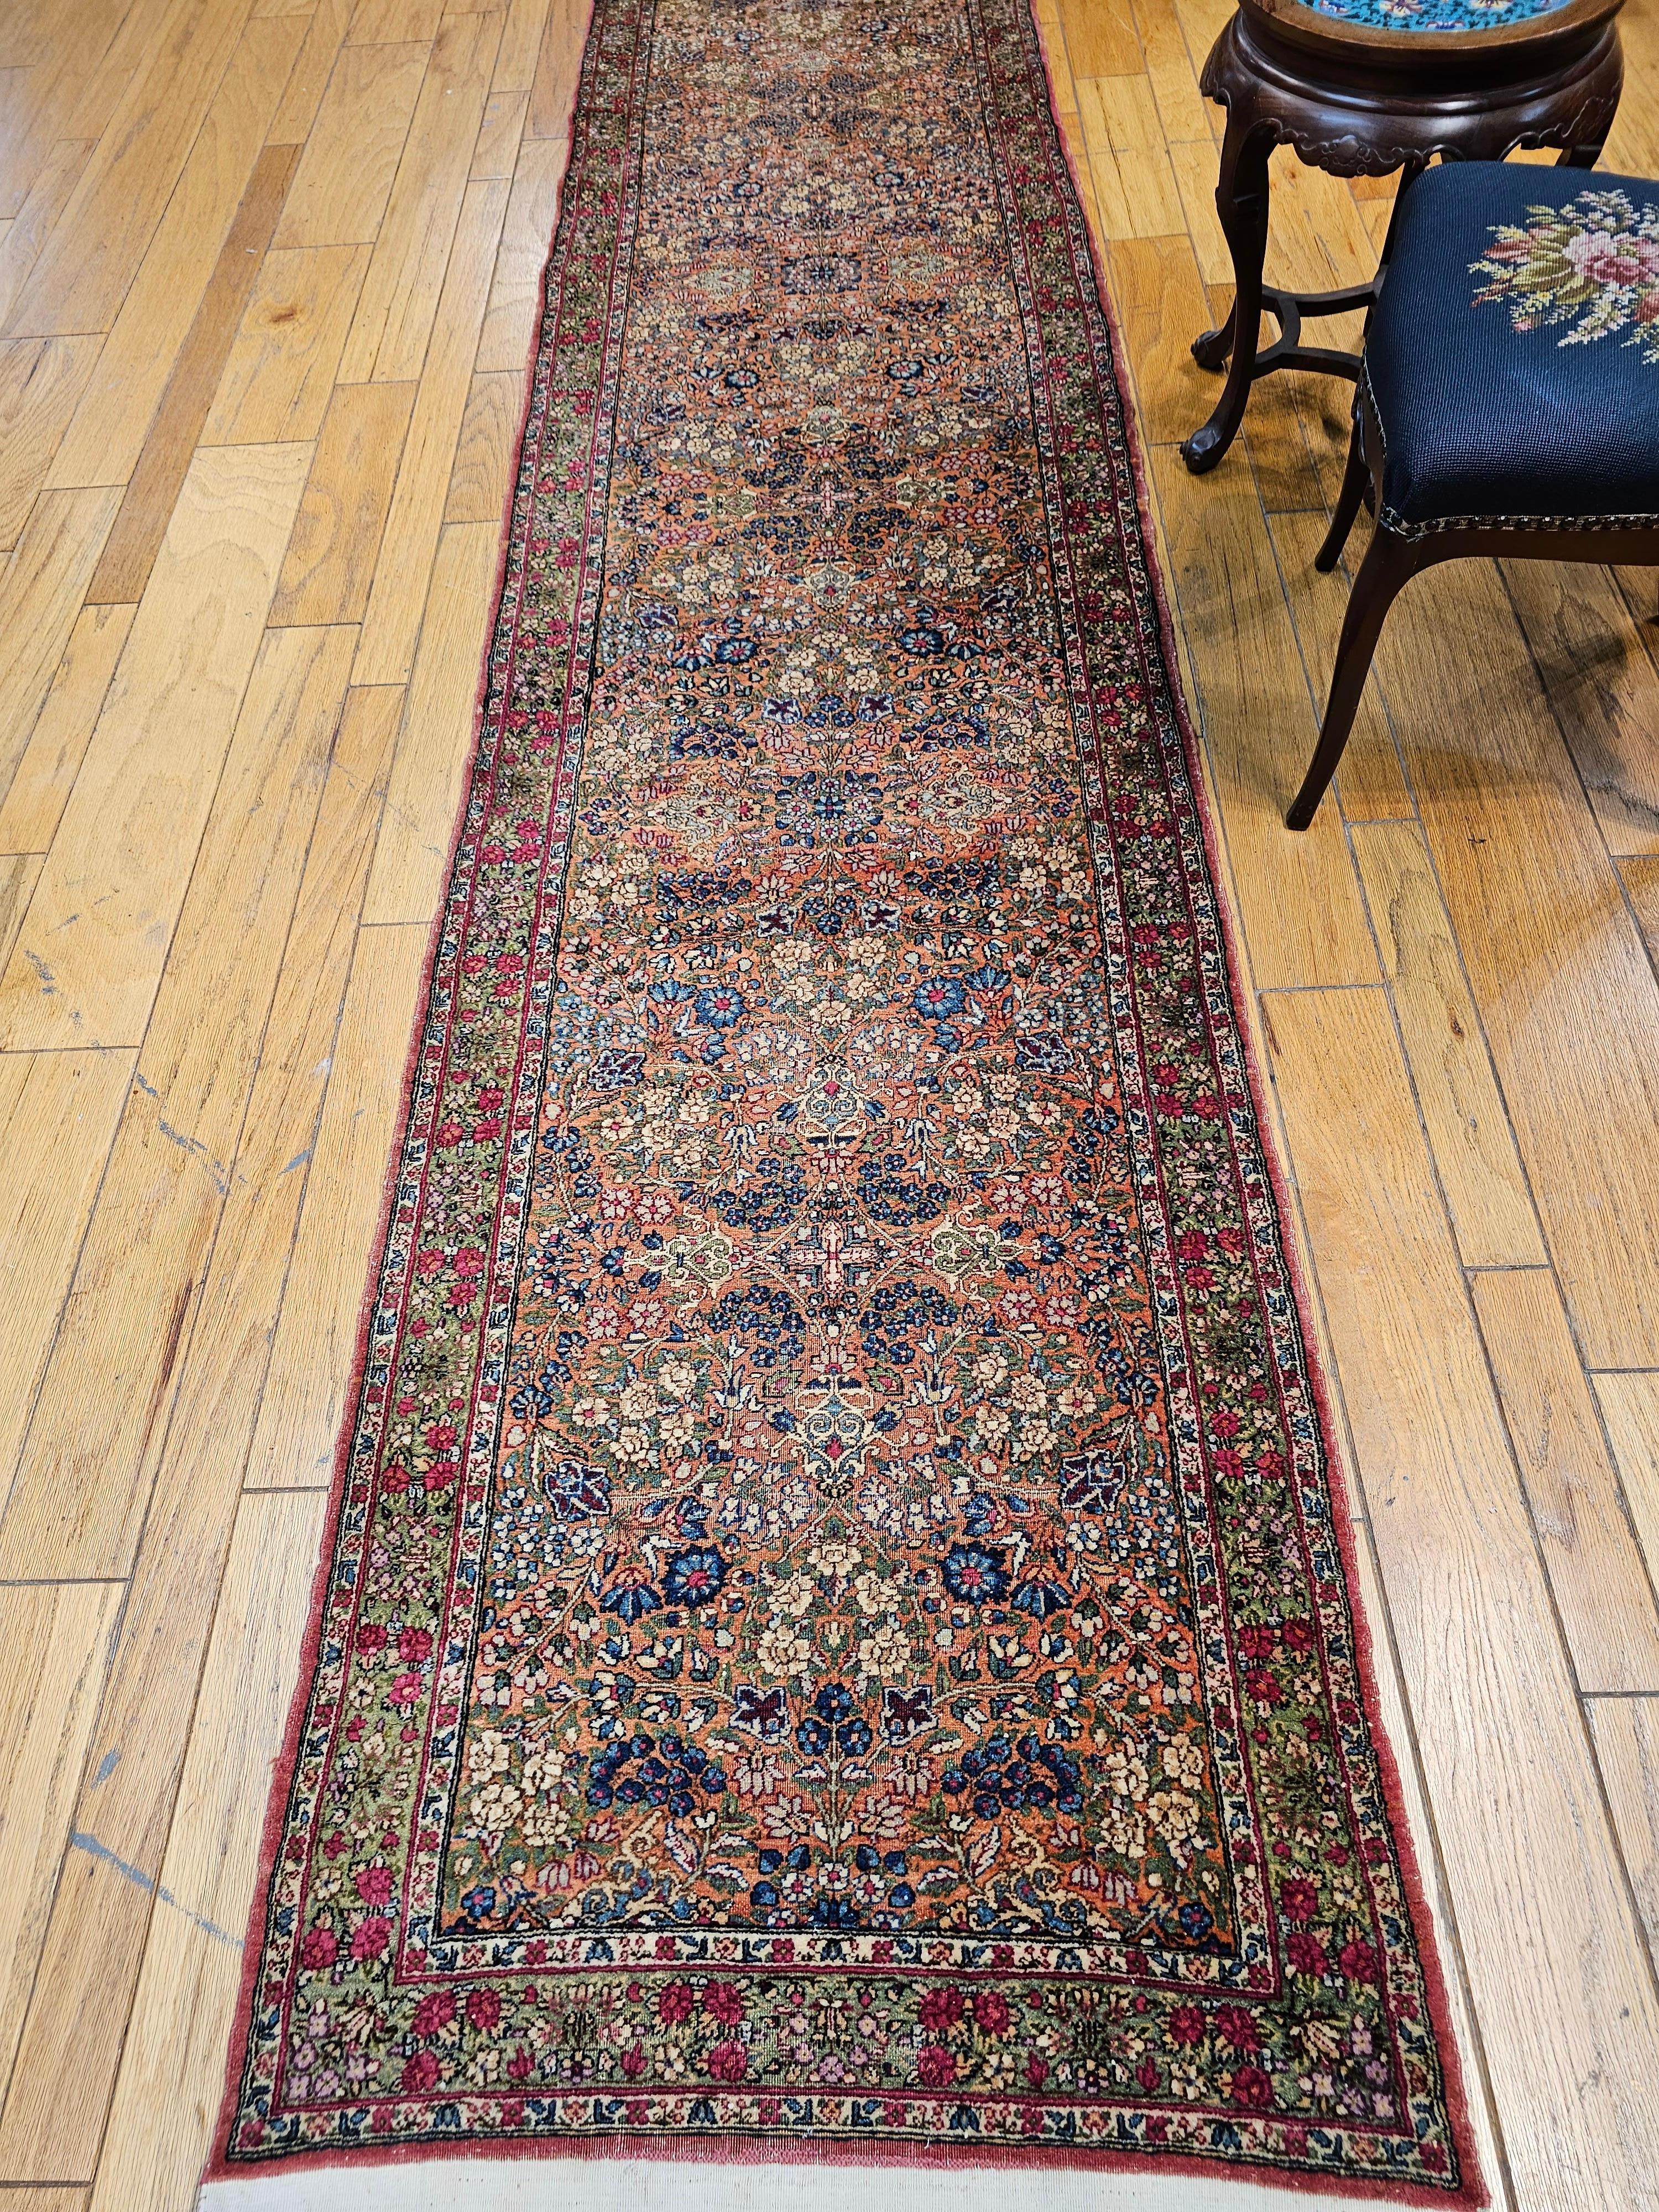 Rare 19th Century Persian Kerman Lavar runner in an allover floral design with rust red field and green border colors.  The Lavar Kerman rarely is seen in a runner format which makes this rug even more desirable. The other unique aspect of this